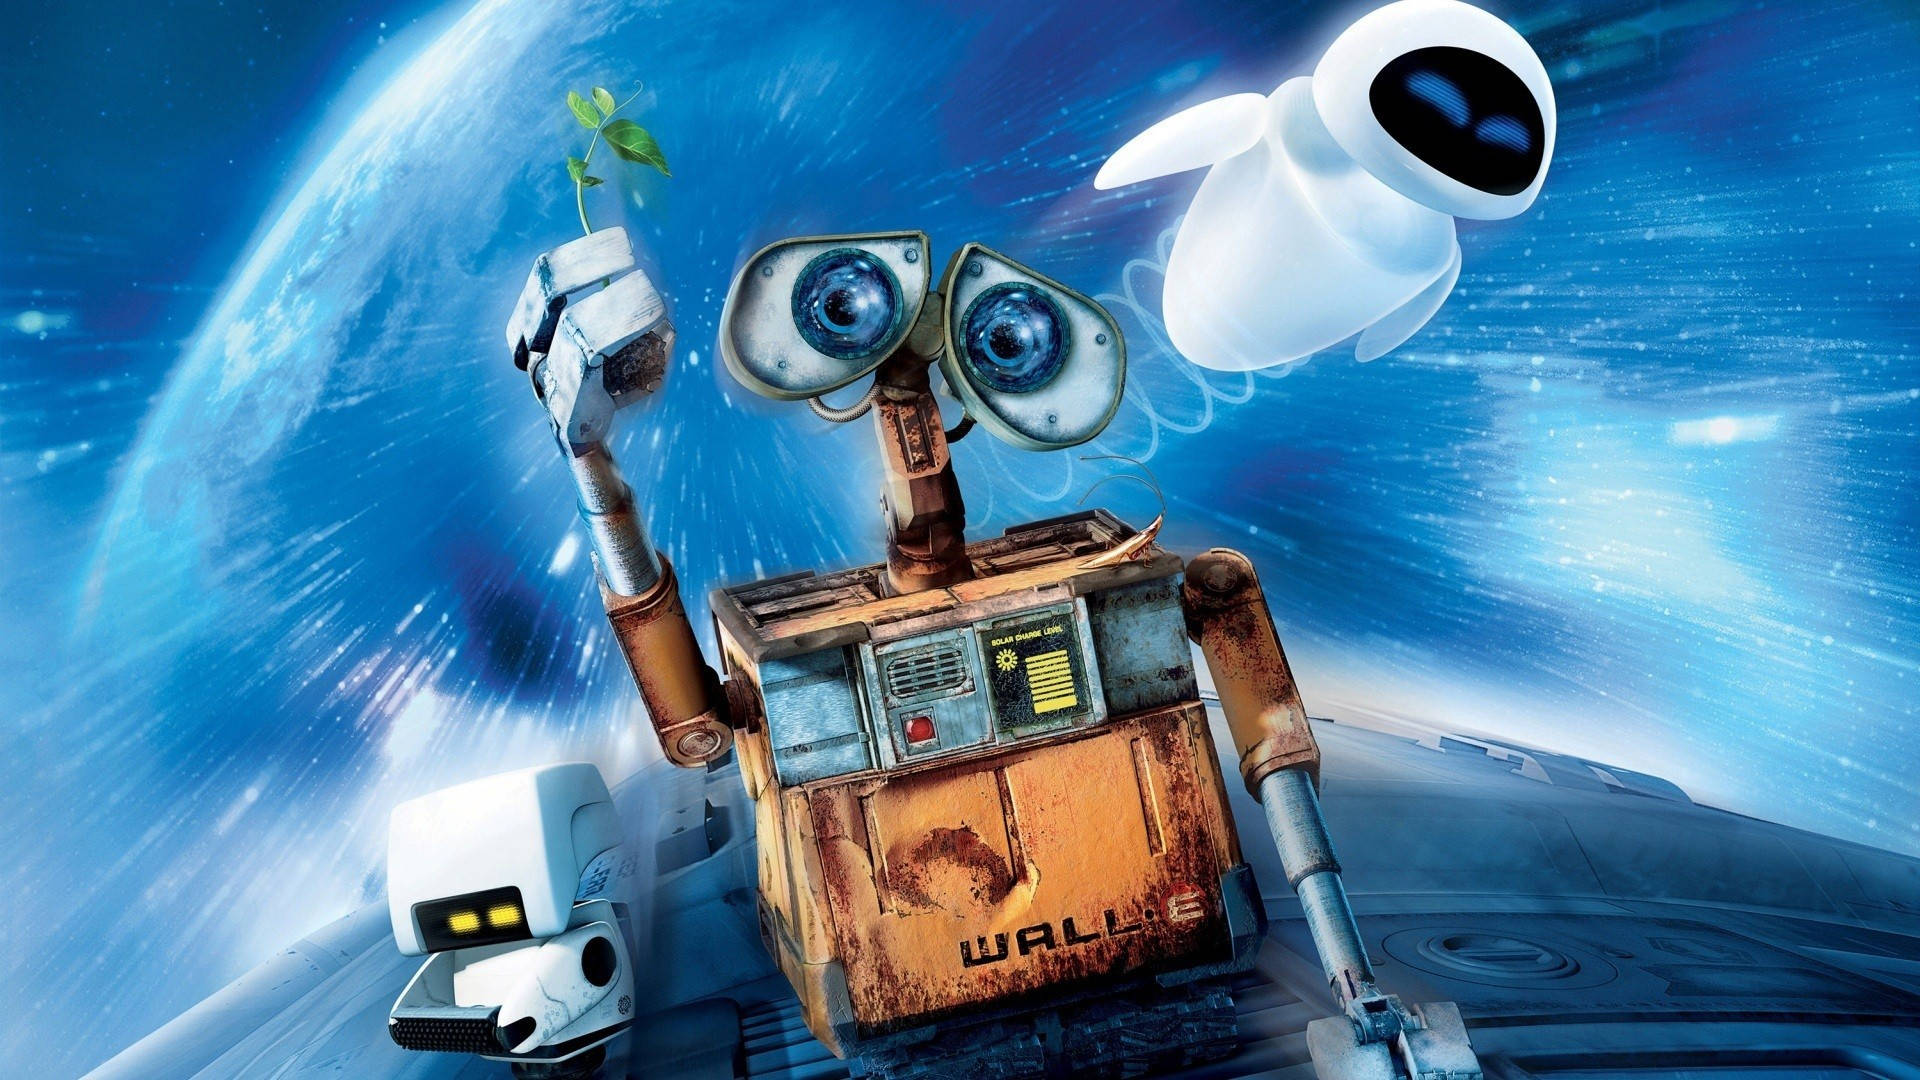 Wall E Seedling Discovery Background